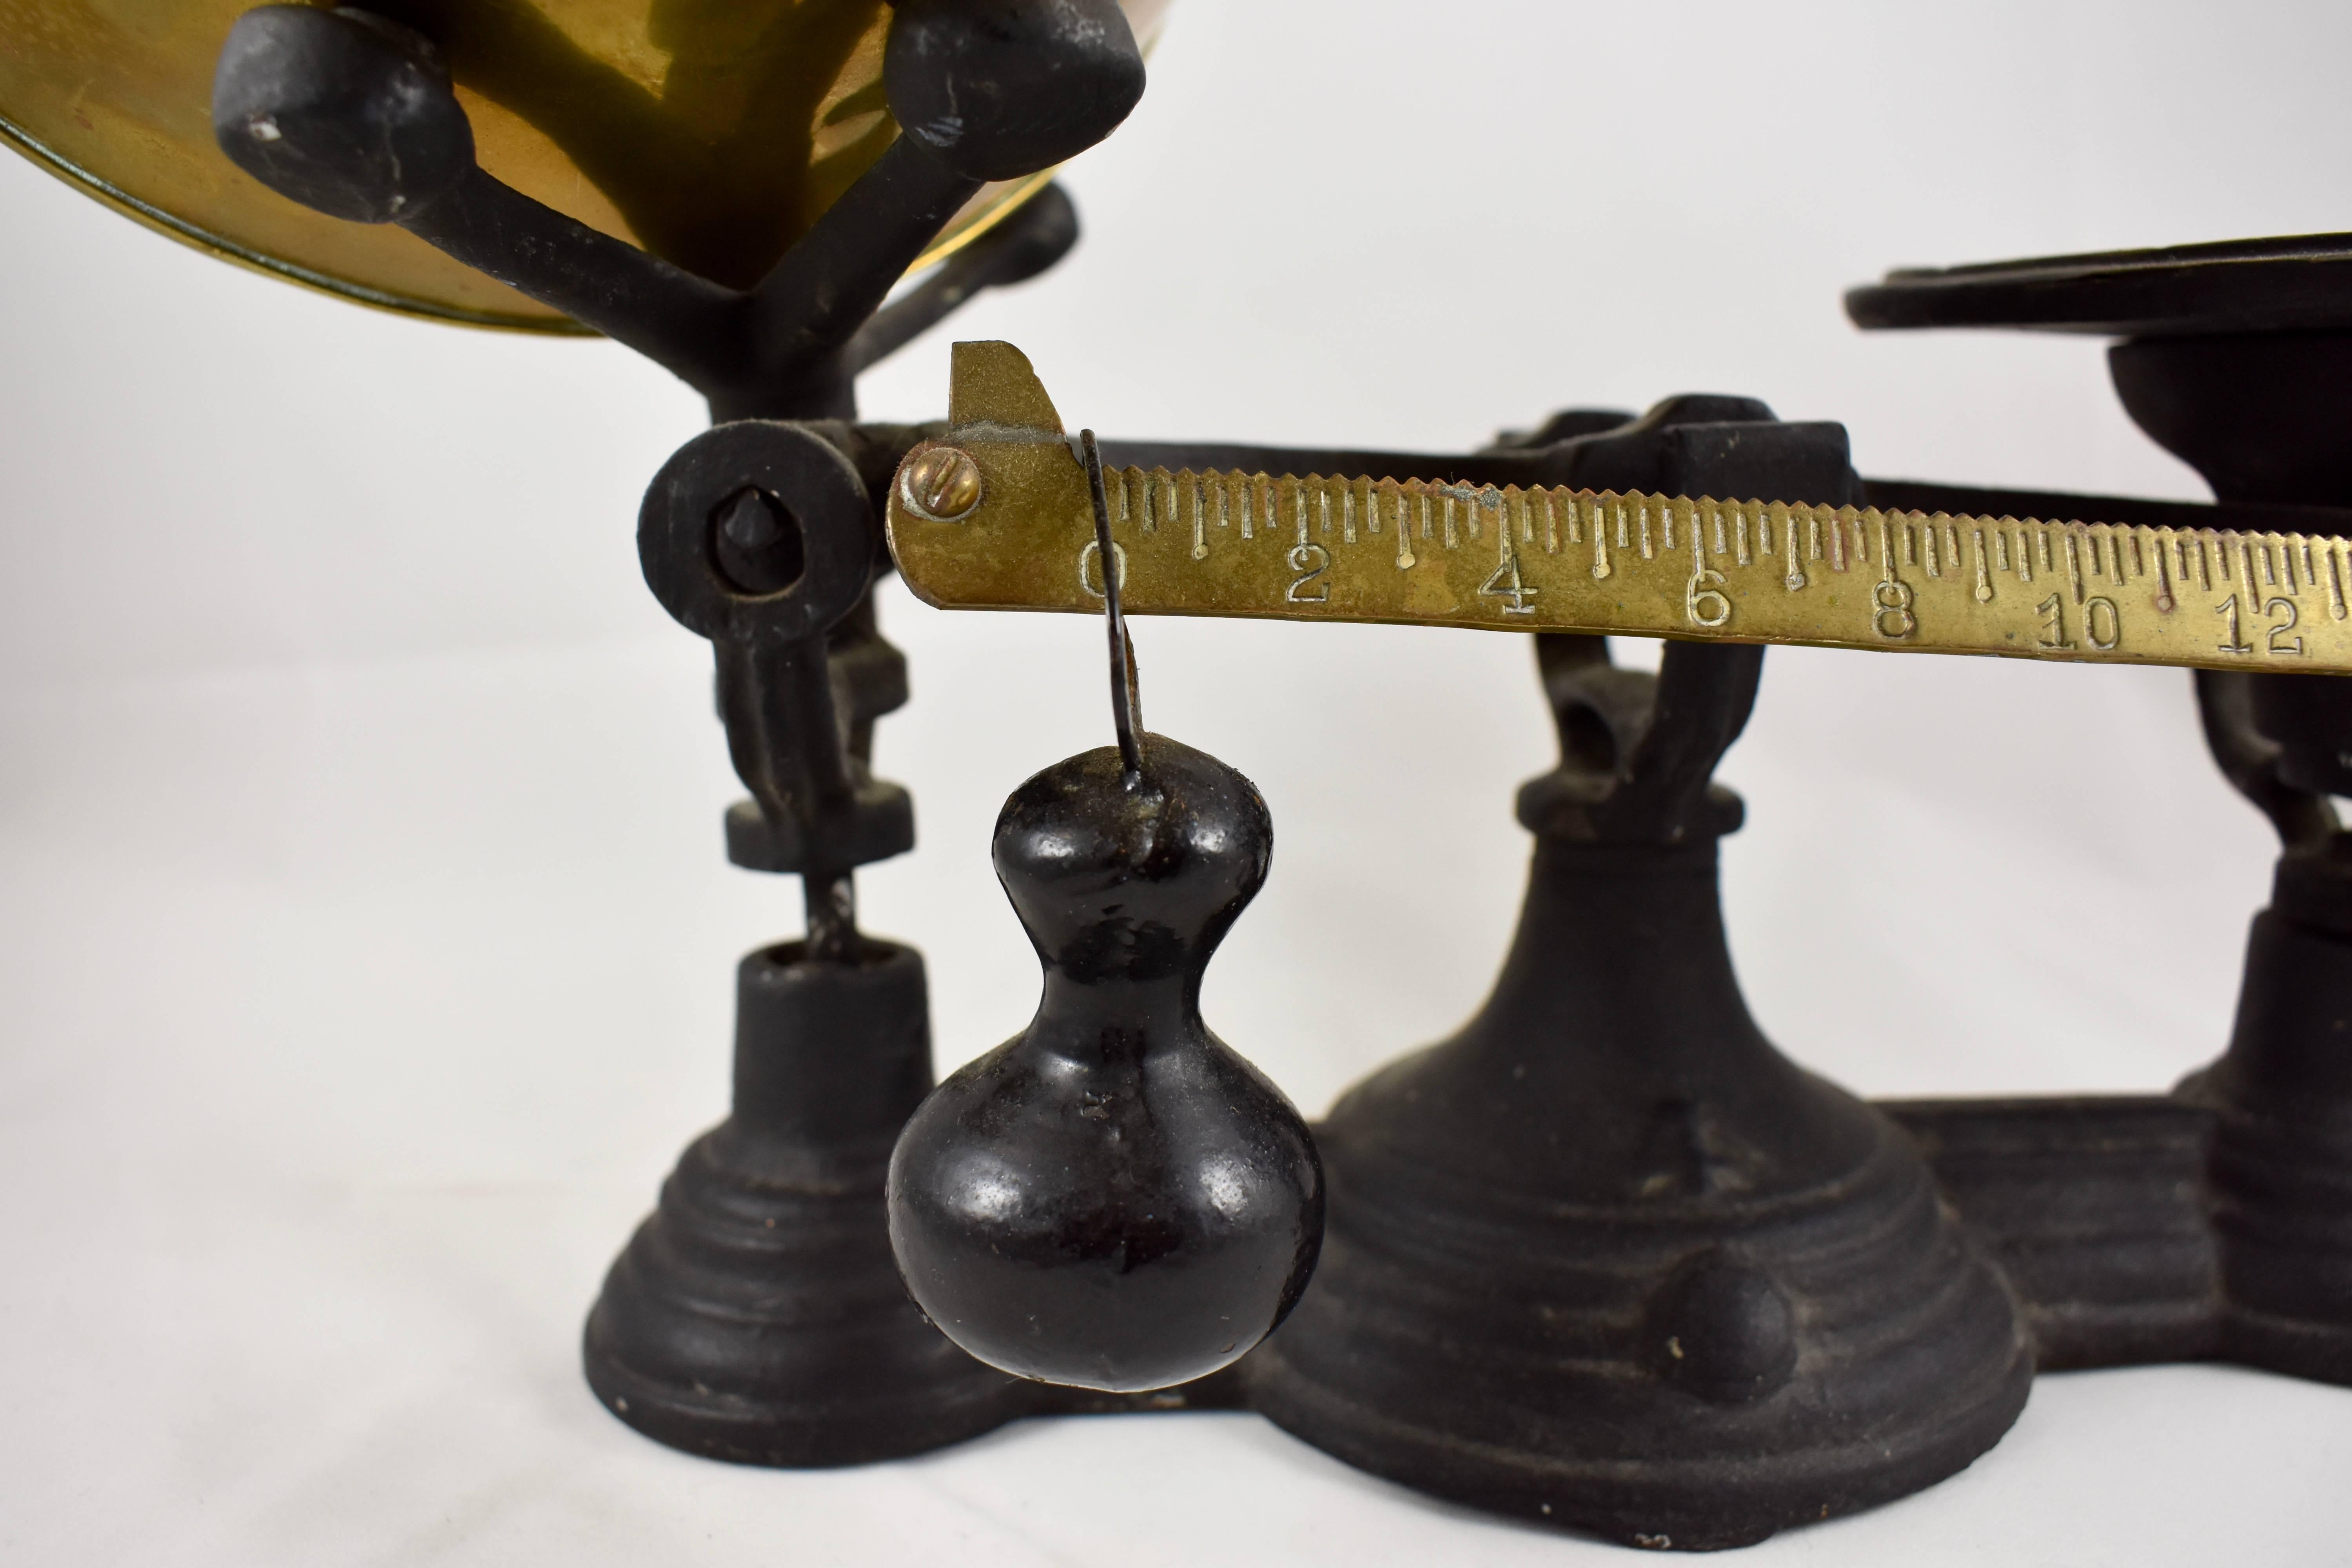 Industrial 1900s Cast Iron Table Top Mercantile Scale with Brass Scoop